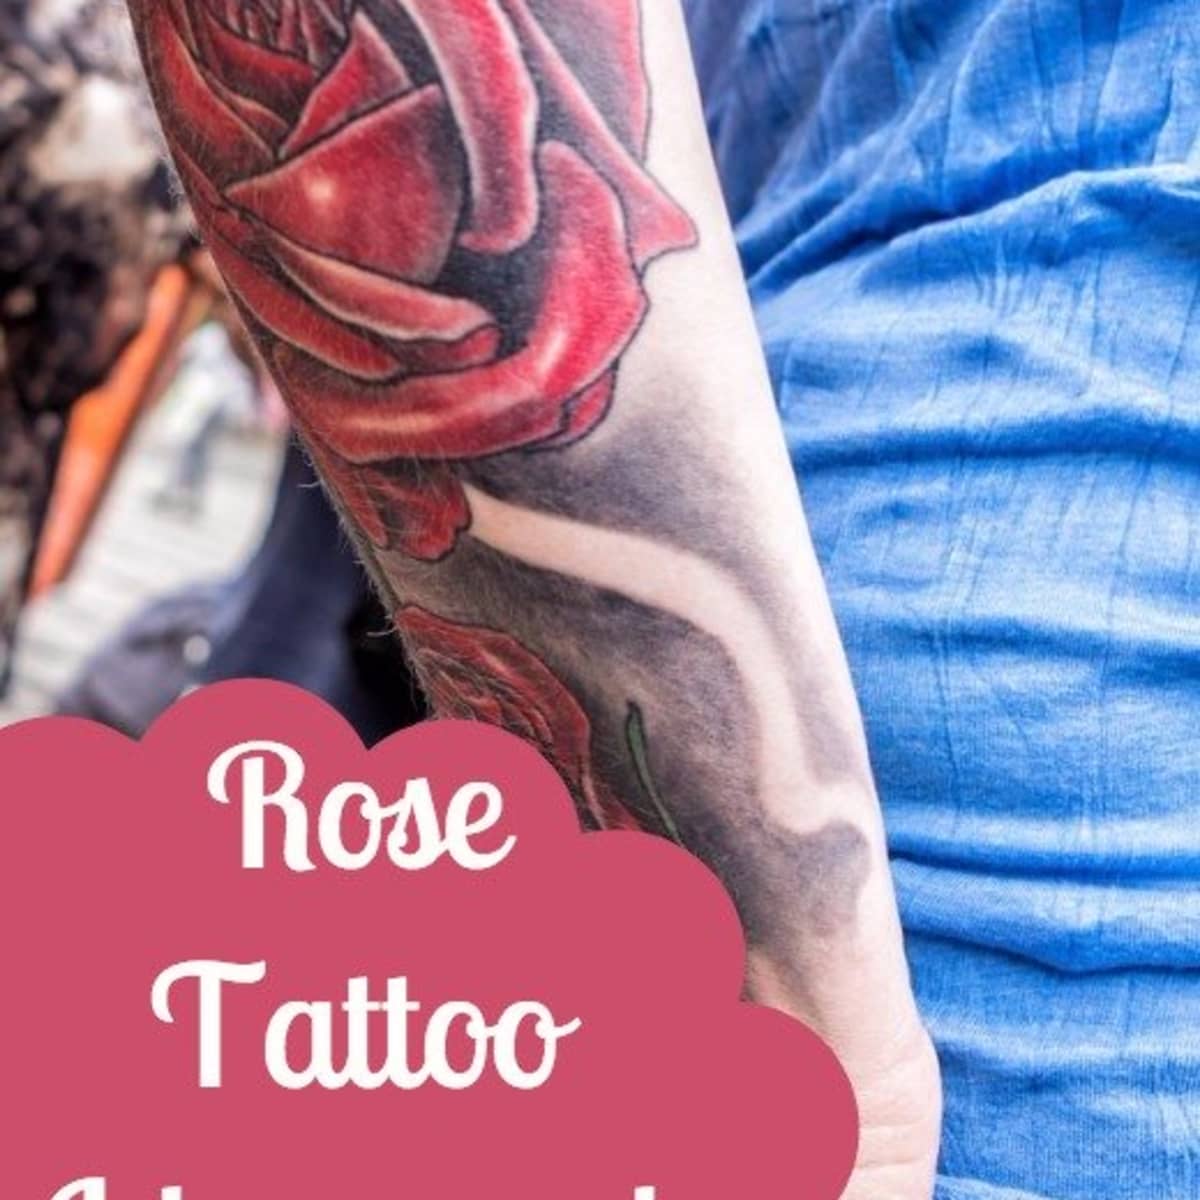 85 Beautiful Cancer Ribbon Tattoos And Their Meaning - AuthorityTattoo